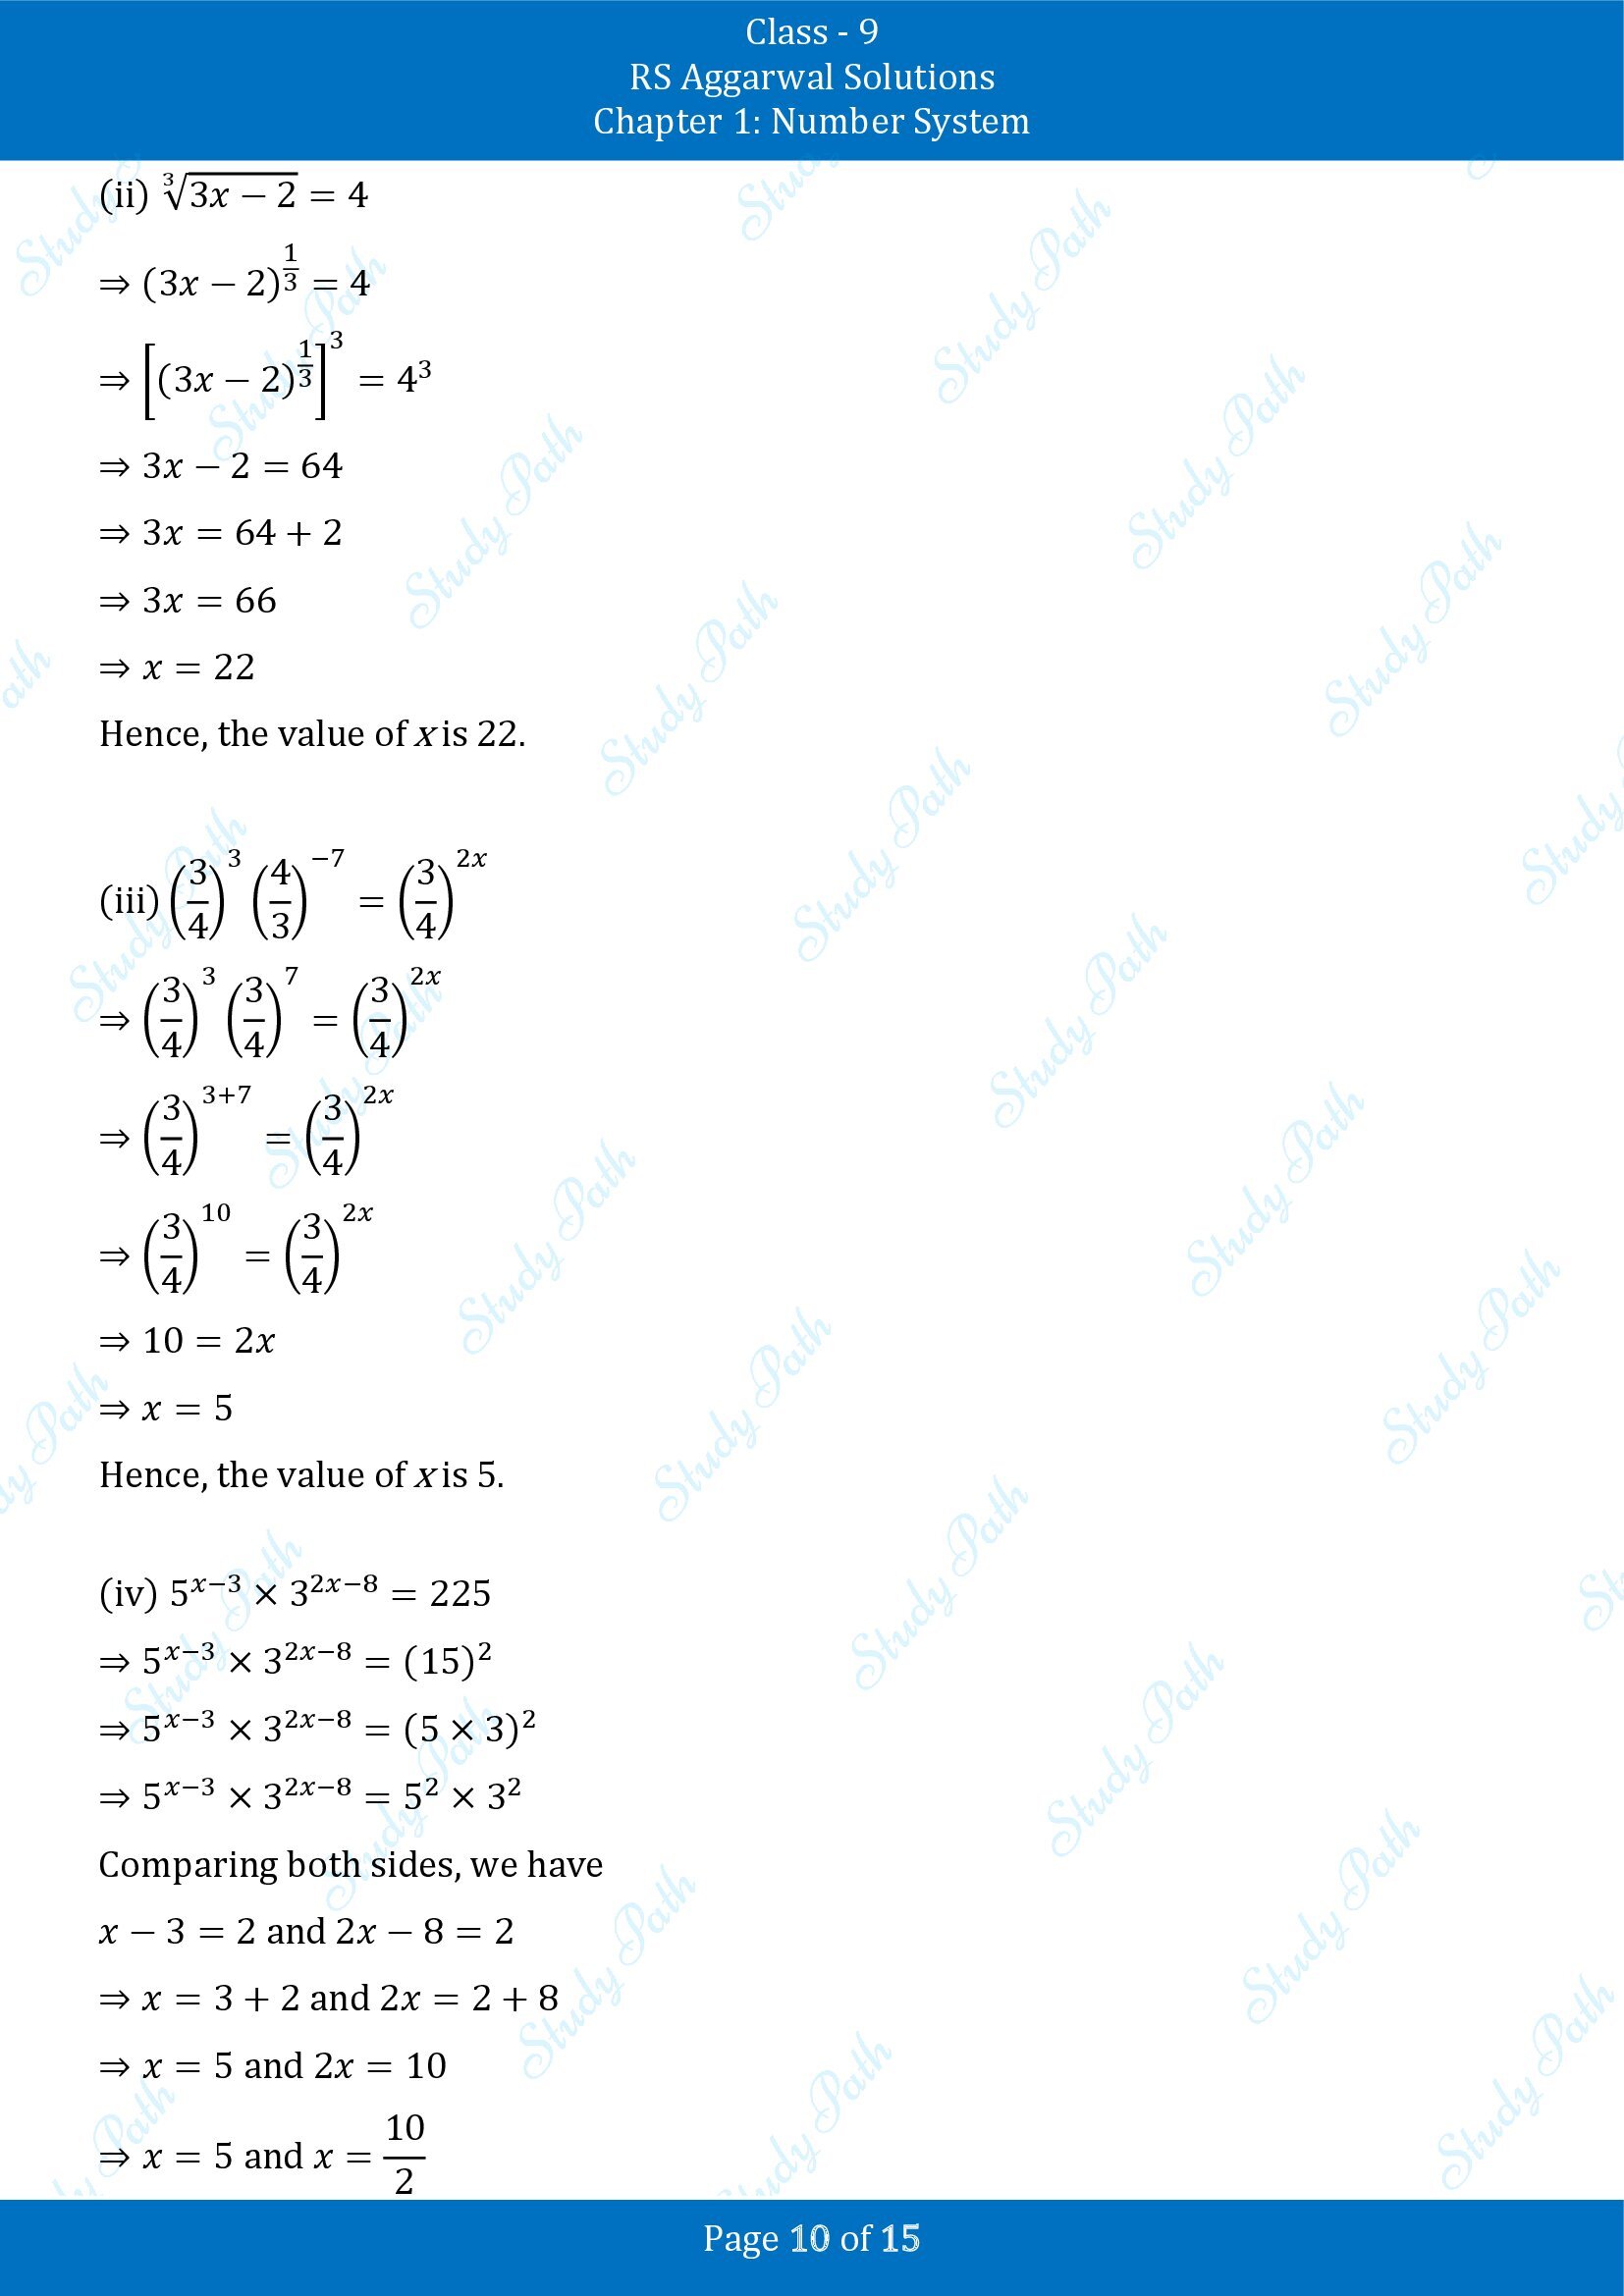 RS Aggarwal Solutions Class 9 Chapter 1 Number System Exercise 1G 00010